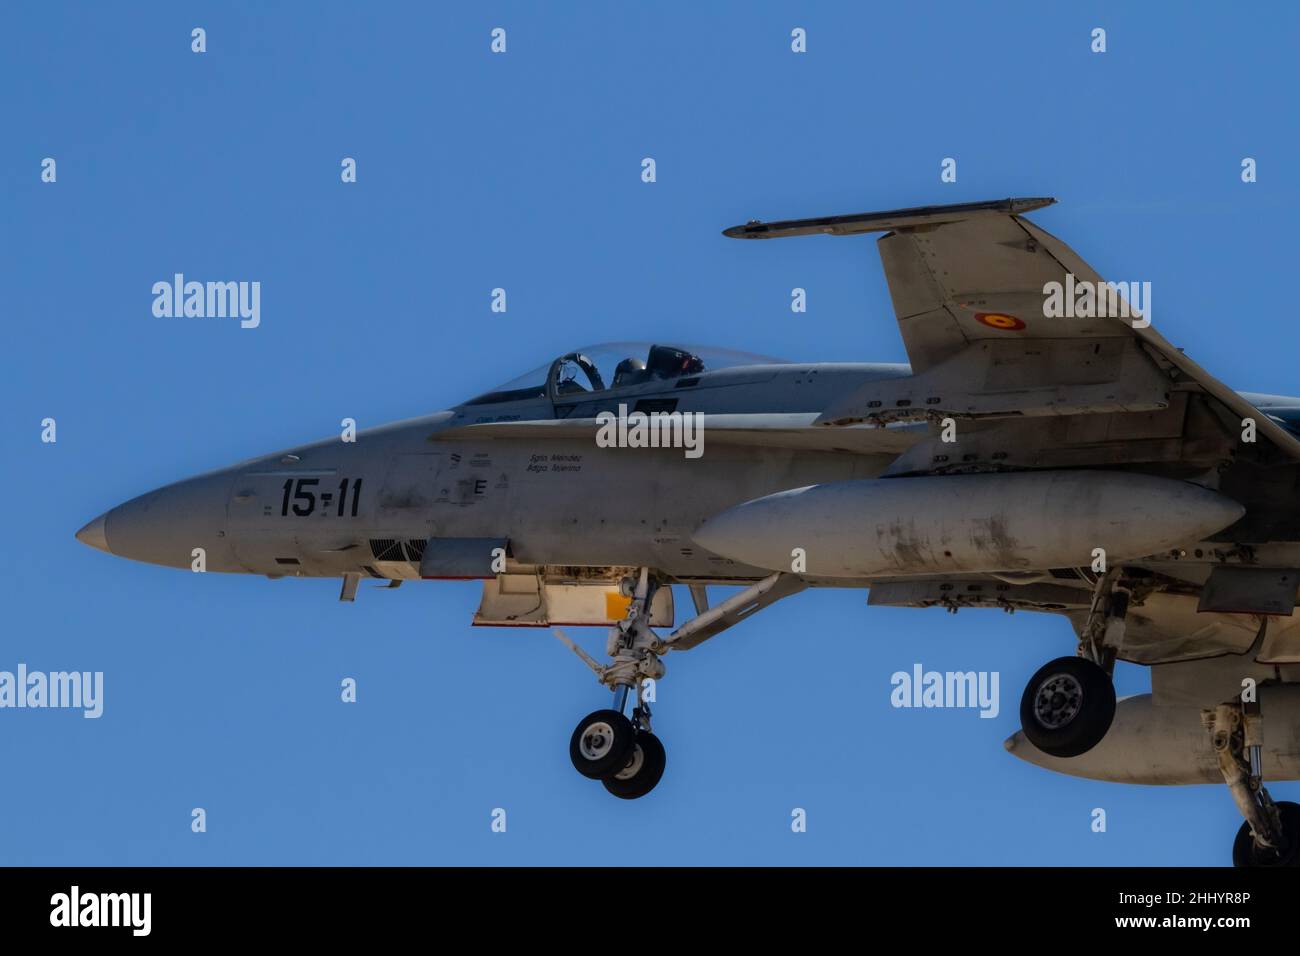 Zaragoza, SPAIN - July 16 2021 - F-A-18A + Hornet single-seat fighter plane belonging to the Zaragoza military base of the Spanish air force on traini Stock Photo